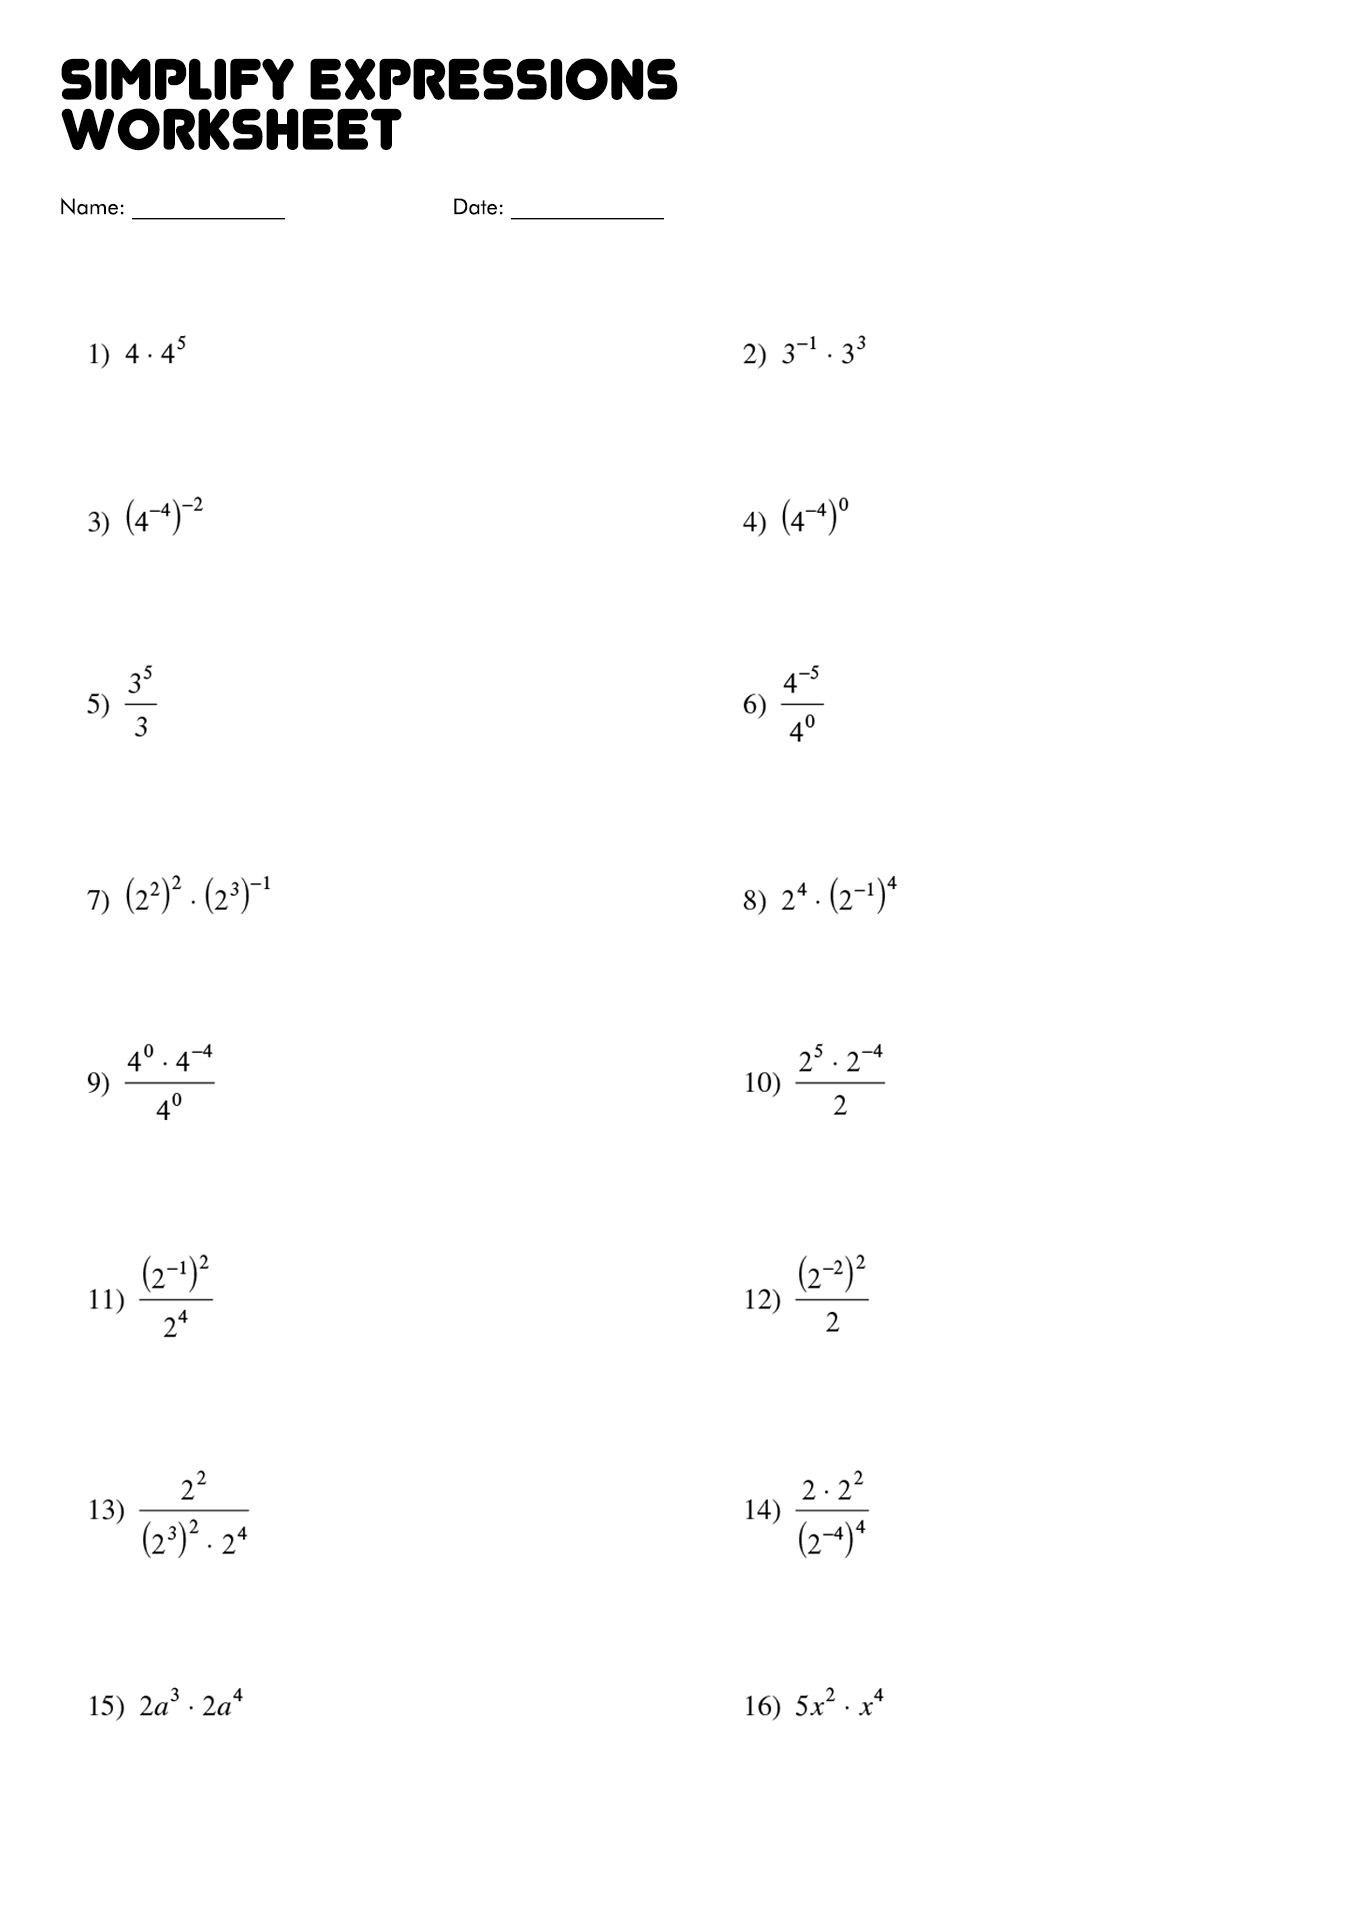 Simplify Expressions Worksheet Image